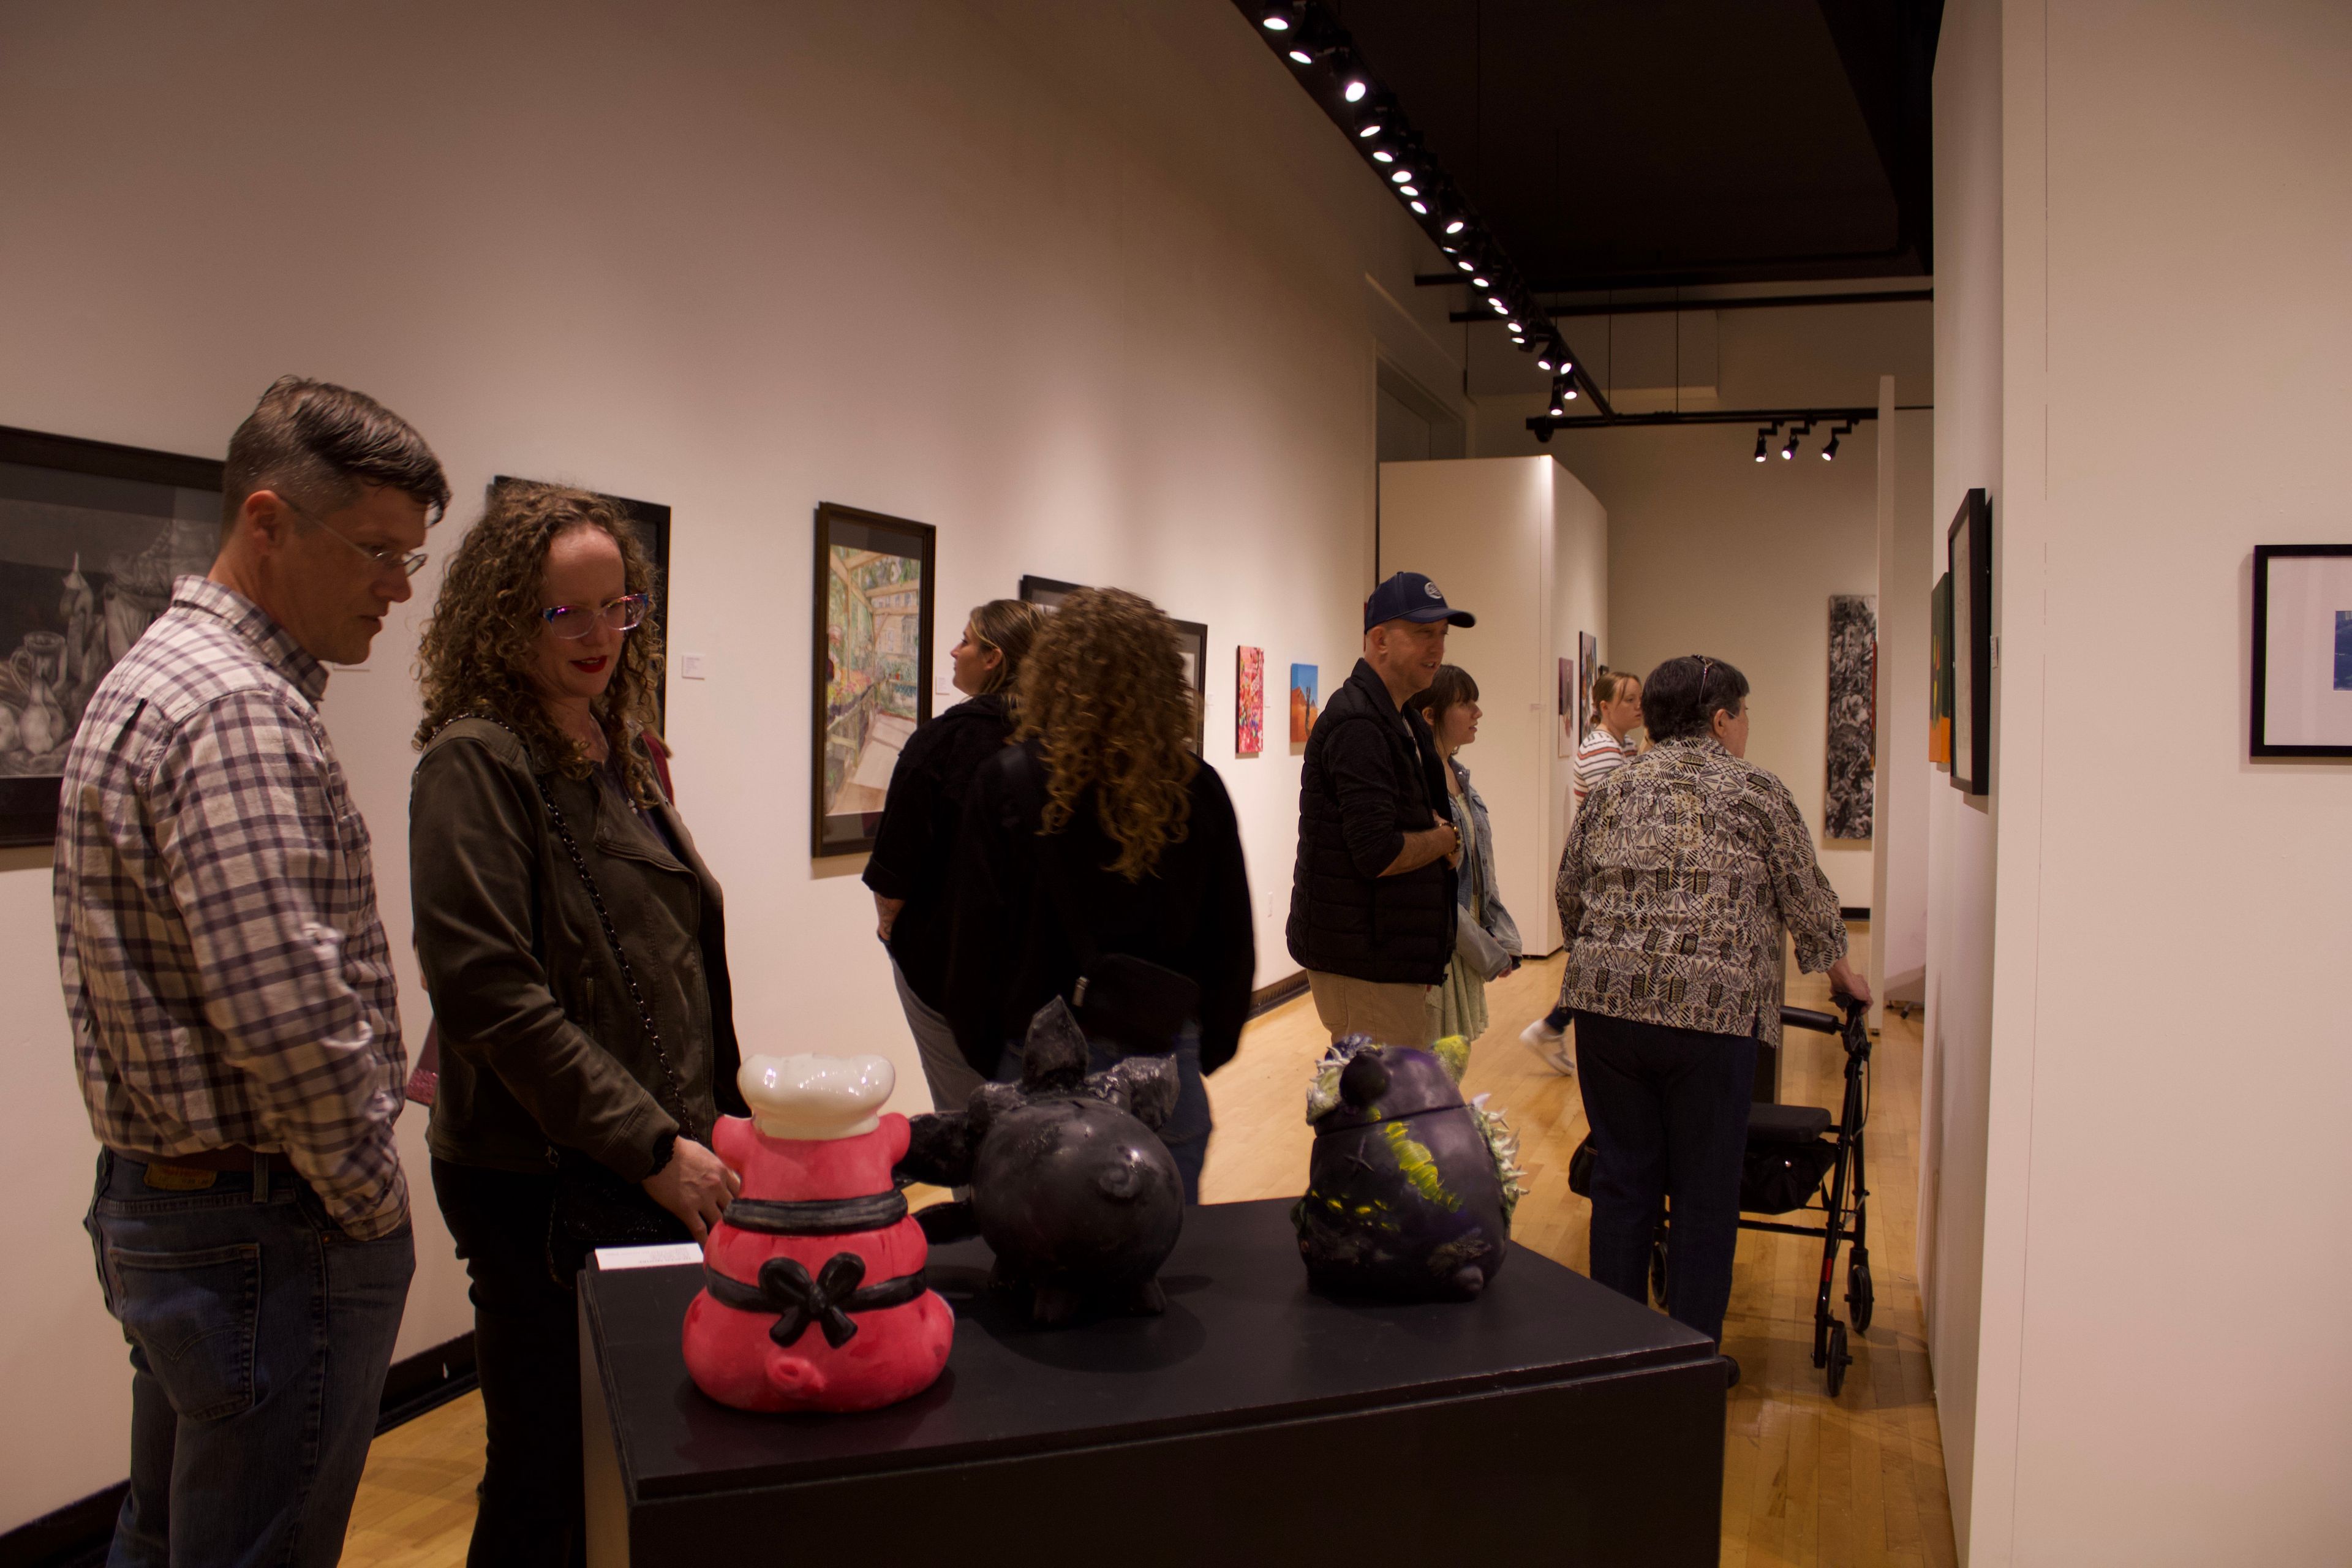 Guests admiring the art showcased at the Annual Juried Student Exhibition.